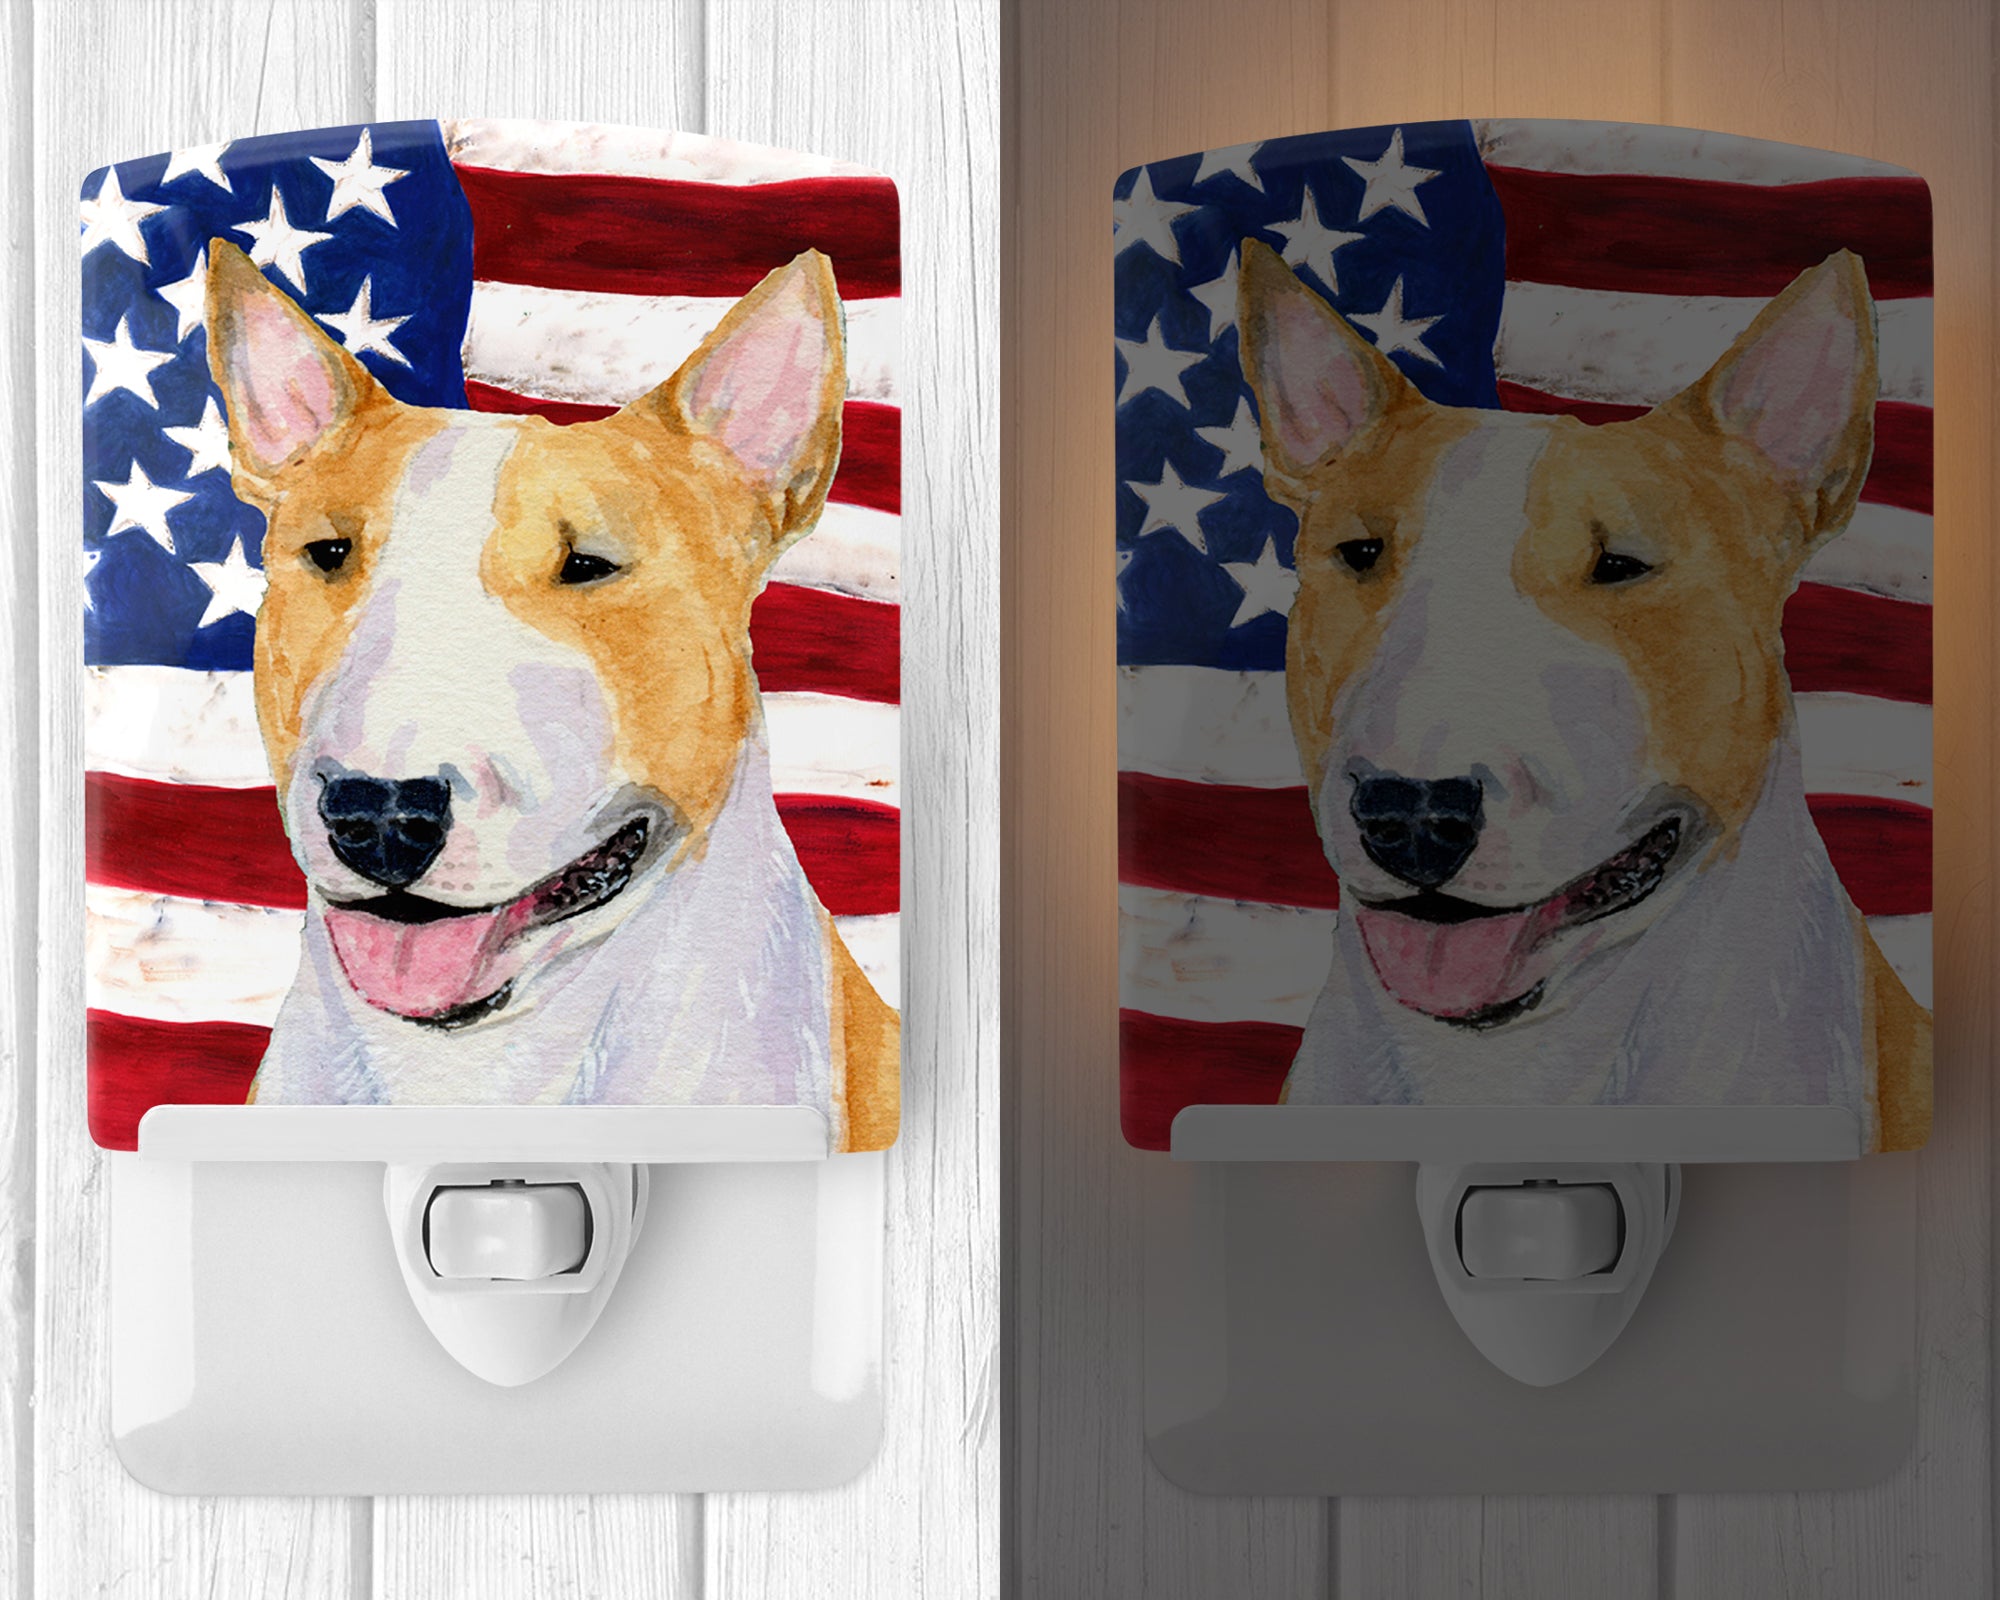 USA American Flag with Bull Terrier Ceramic Night Light SS4023CNL - the-store.com